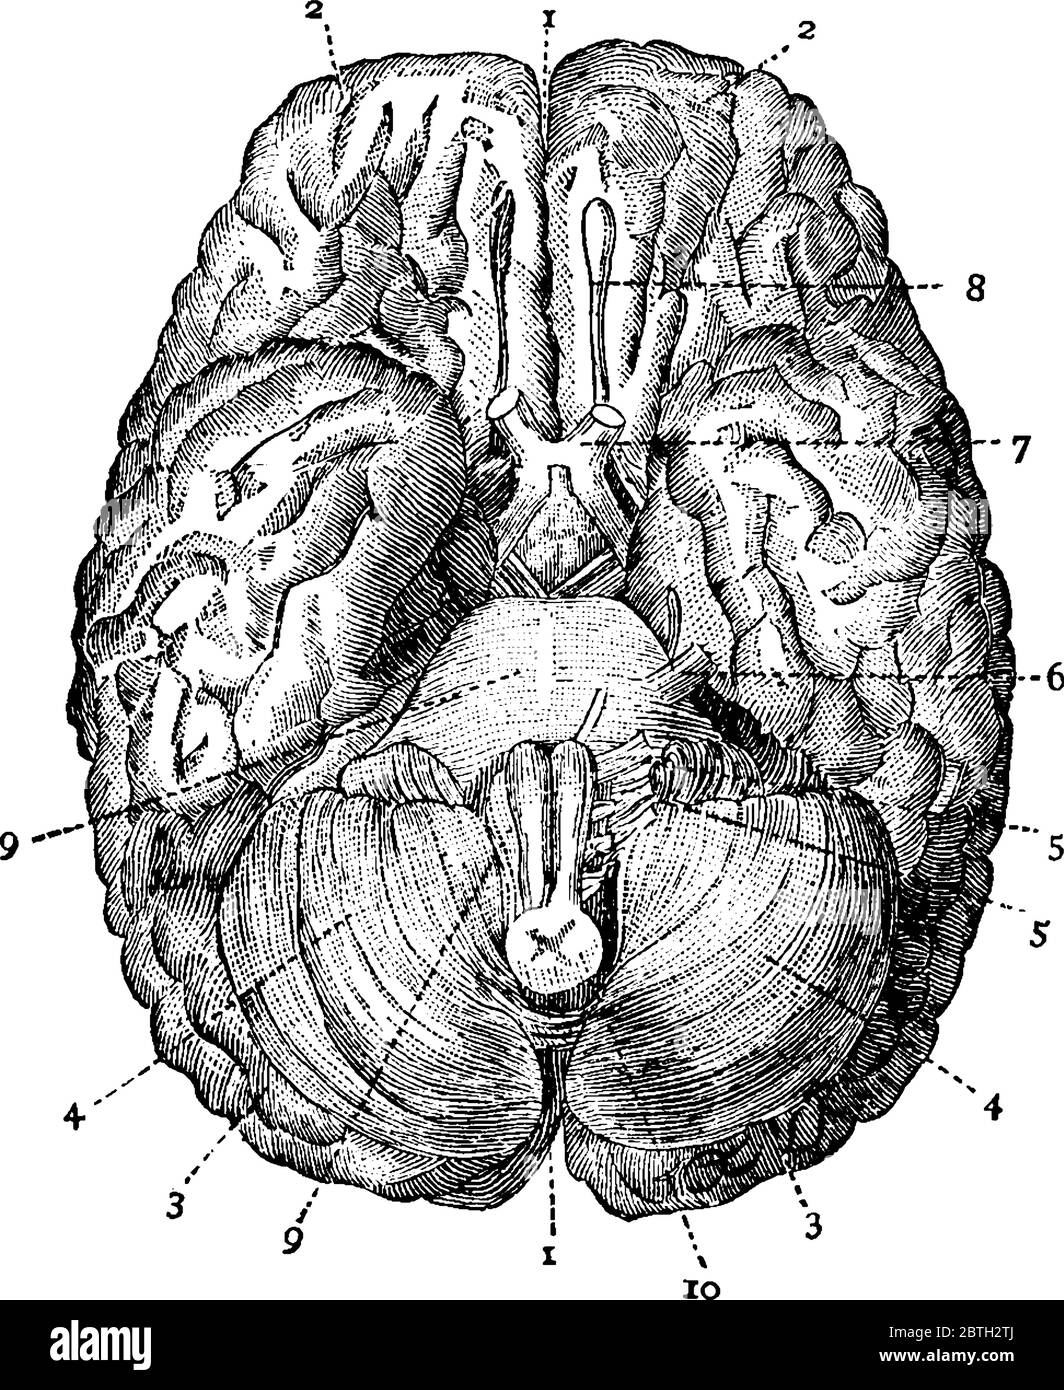 The human brain viewed from below, with the parts, 1: Great fissure; 2: Anterior lobes of cerebrum; 3: Posterior lobes of cerebrum; 4: Lobes of cerebe Stock Vector